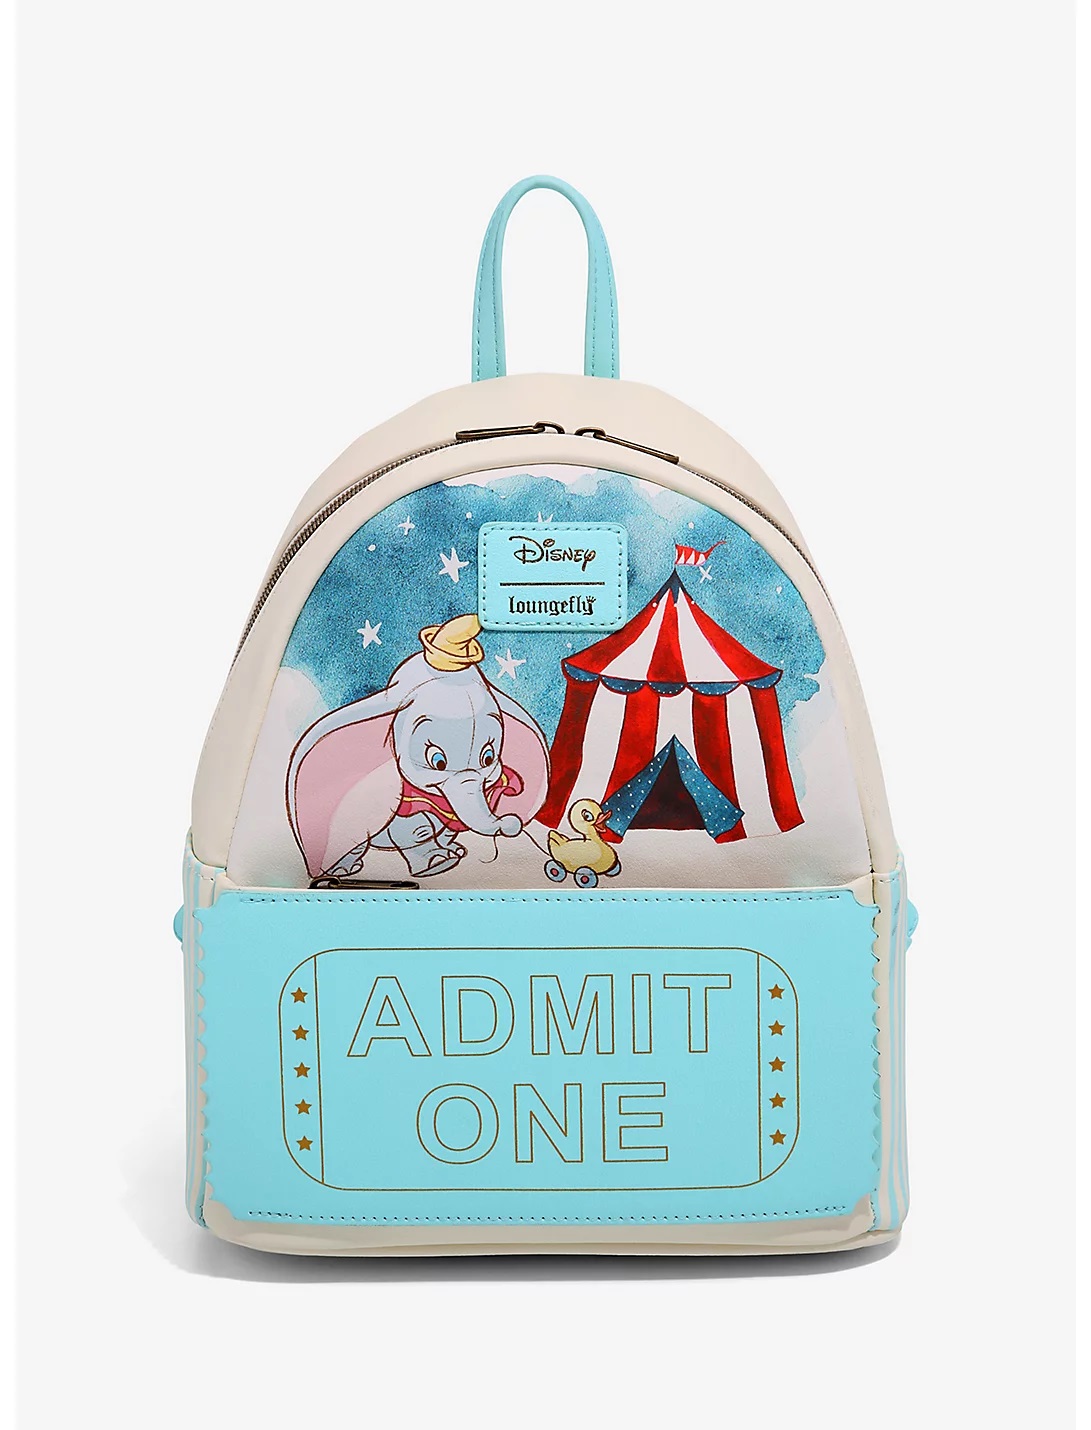 New Alice in Wonderland Loungefly Backpack Arrives at Disneyland Resort -  WDW News Today